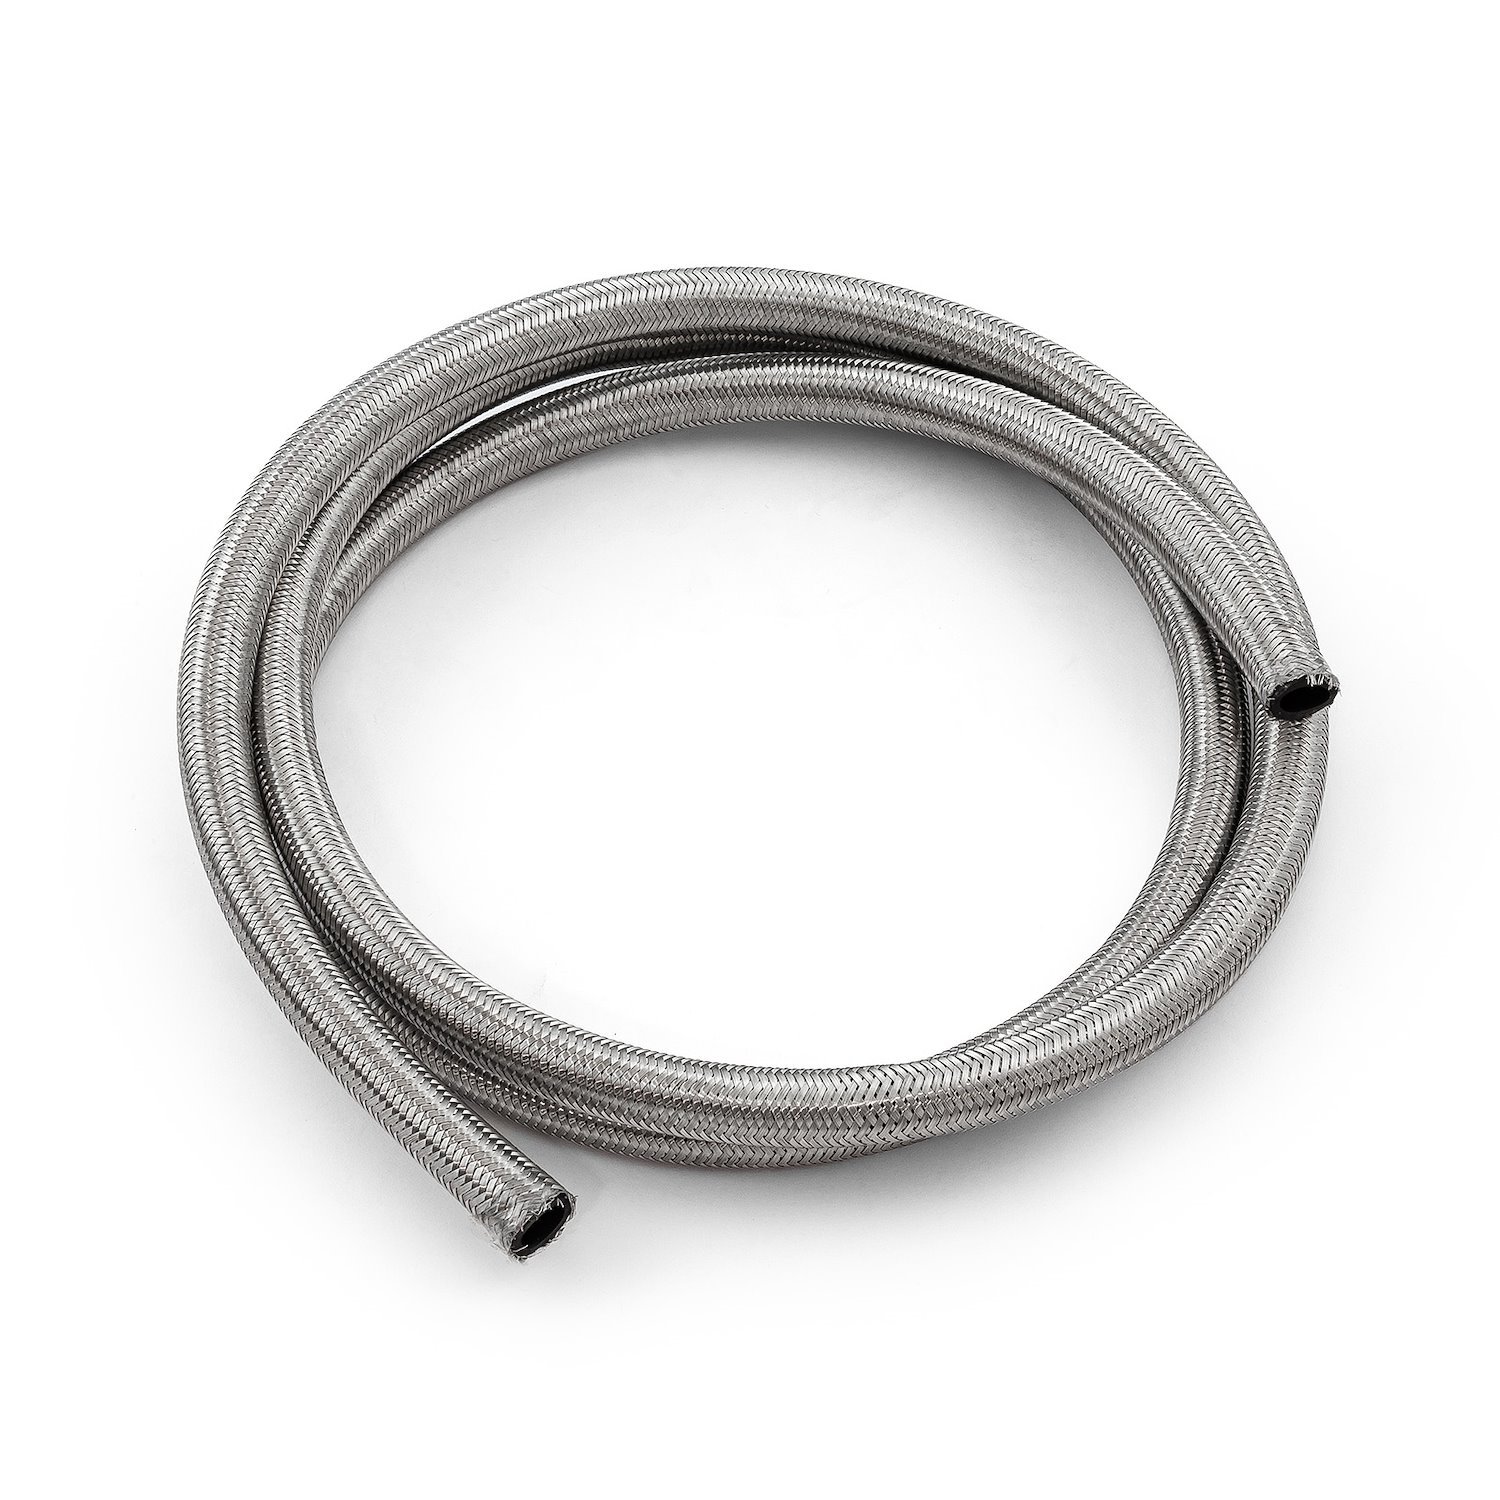 1-339-003-01 -8 AN Braided Stainless Steel Hose Line 3 ft. Length